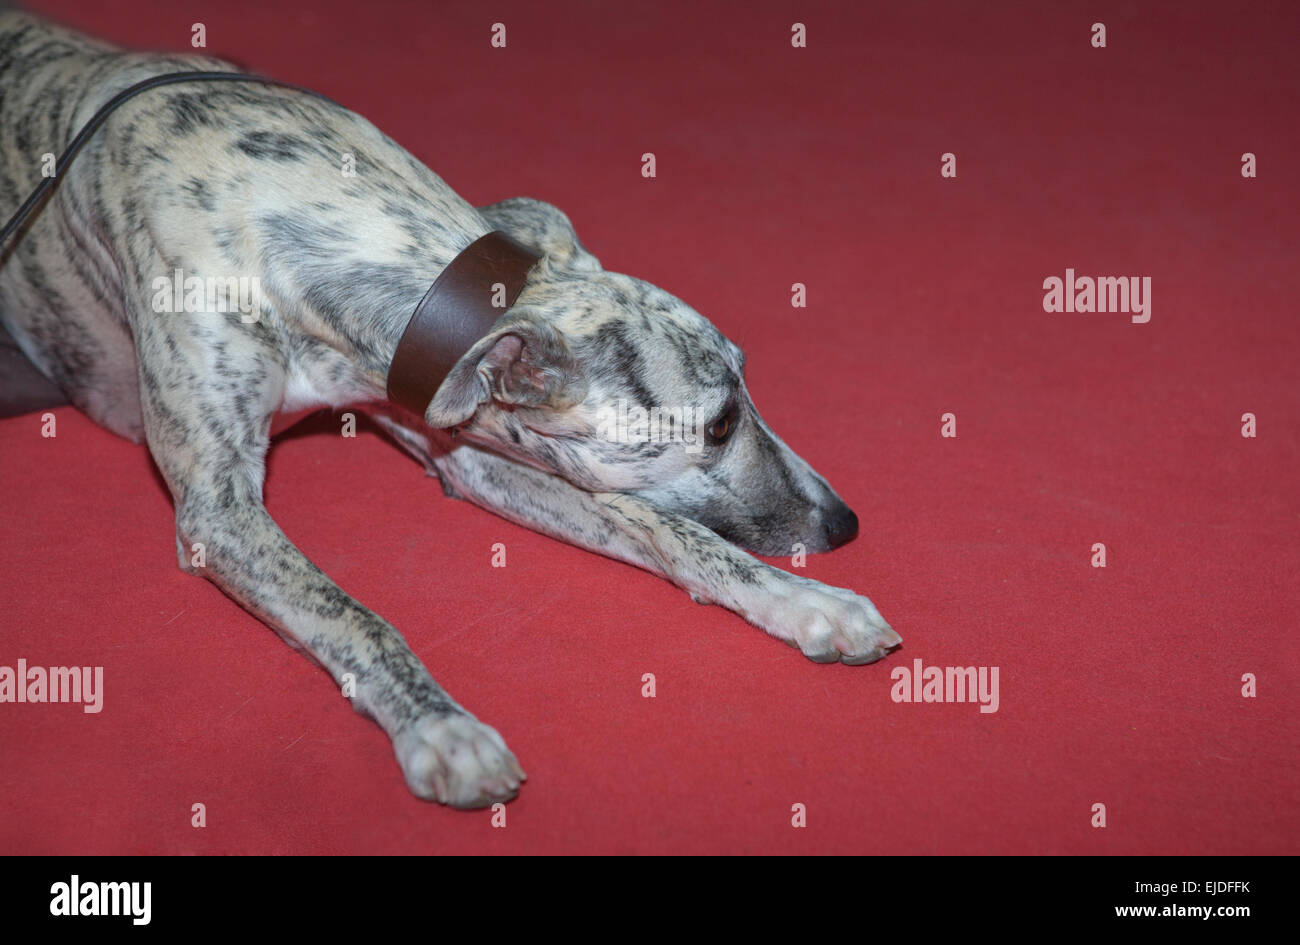 Spanish greyhound, 9 months old, portrait over red background Stock Photo